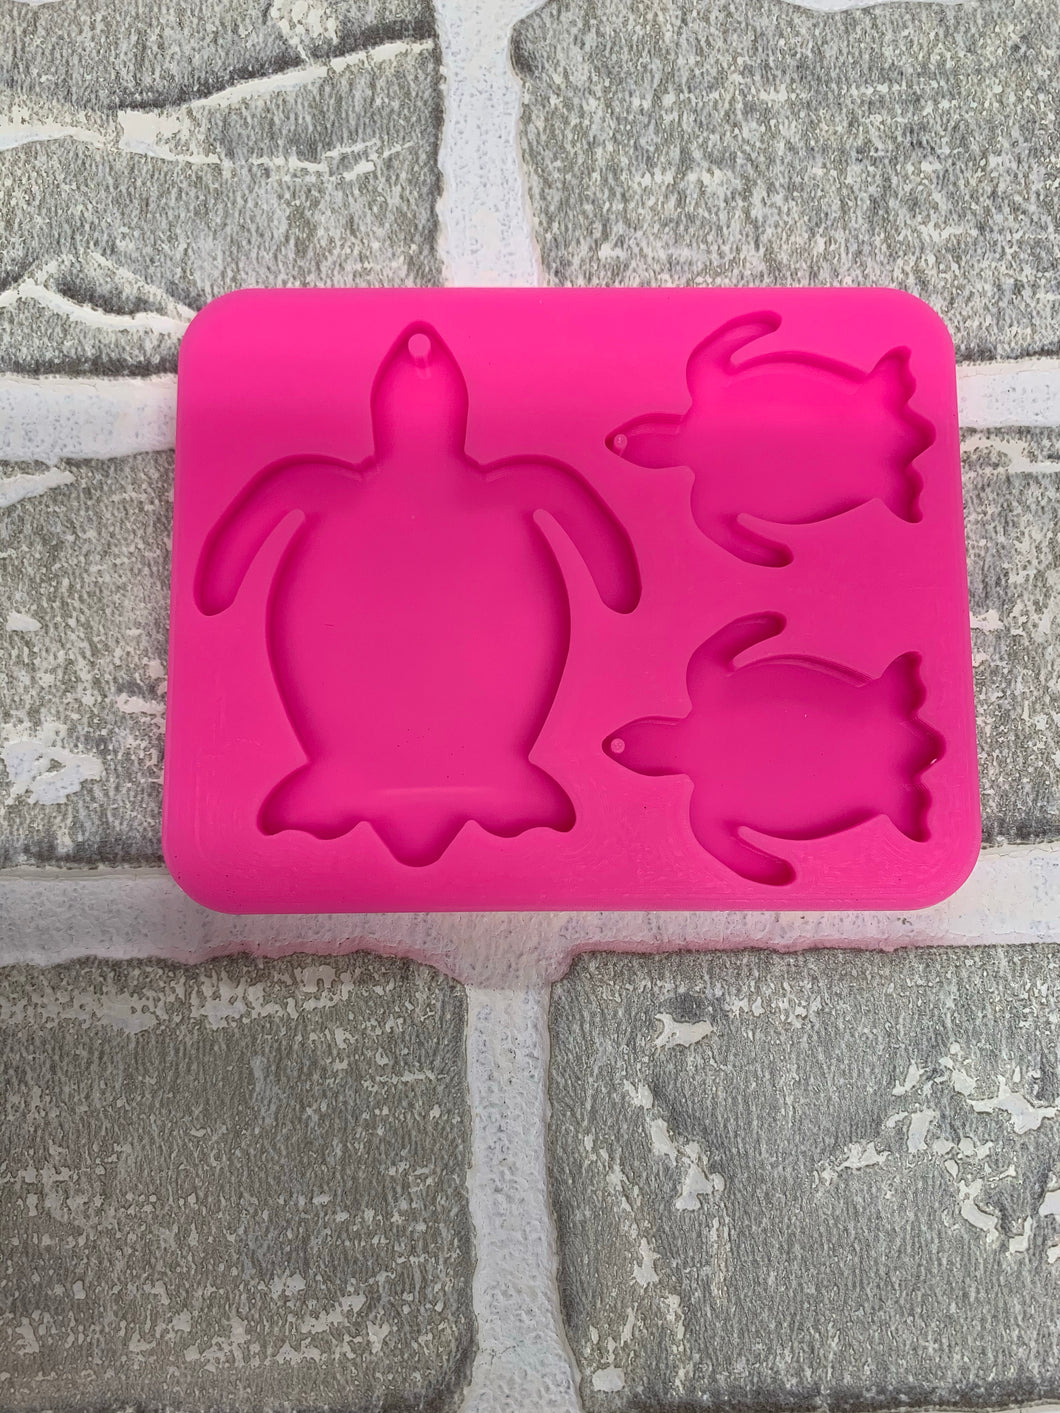 Mom/ baby turtle mold